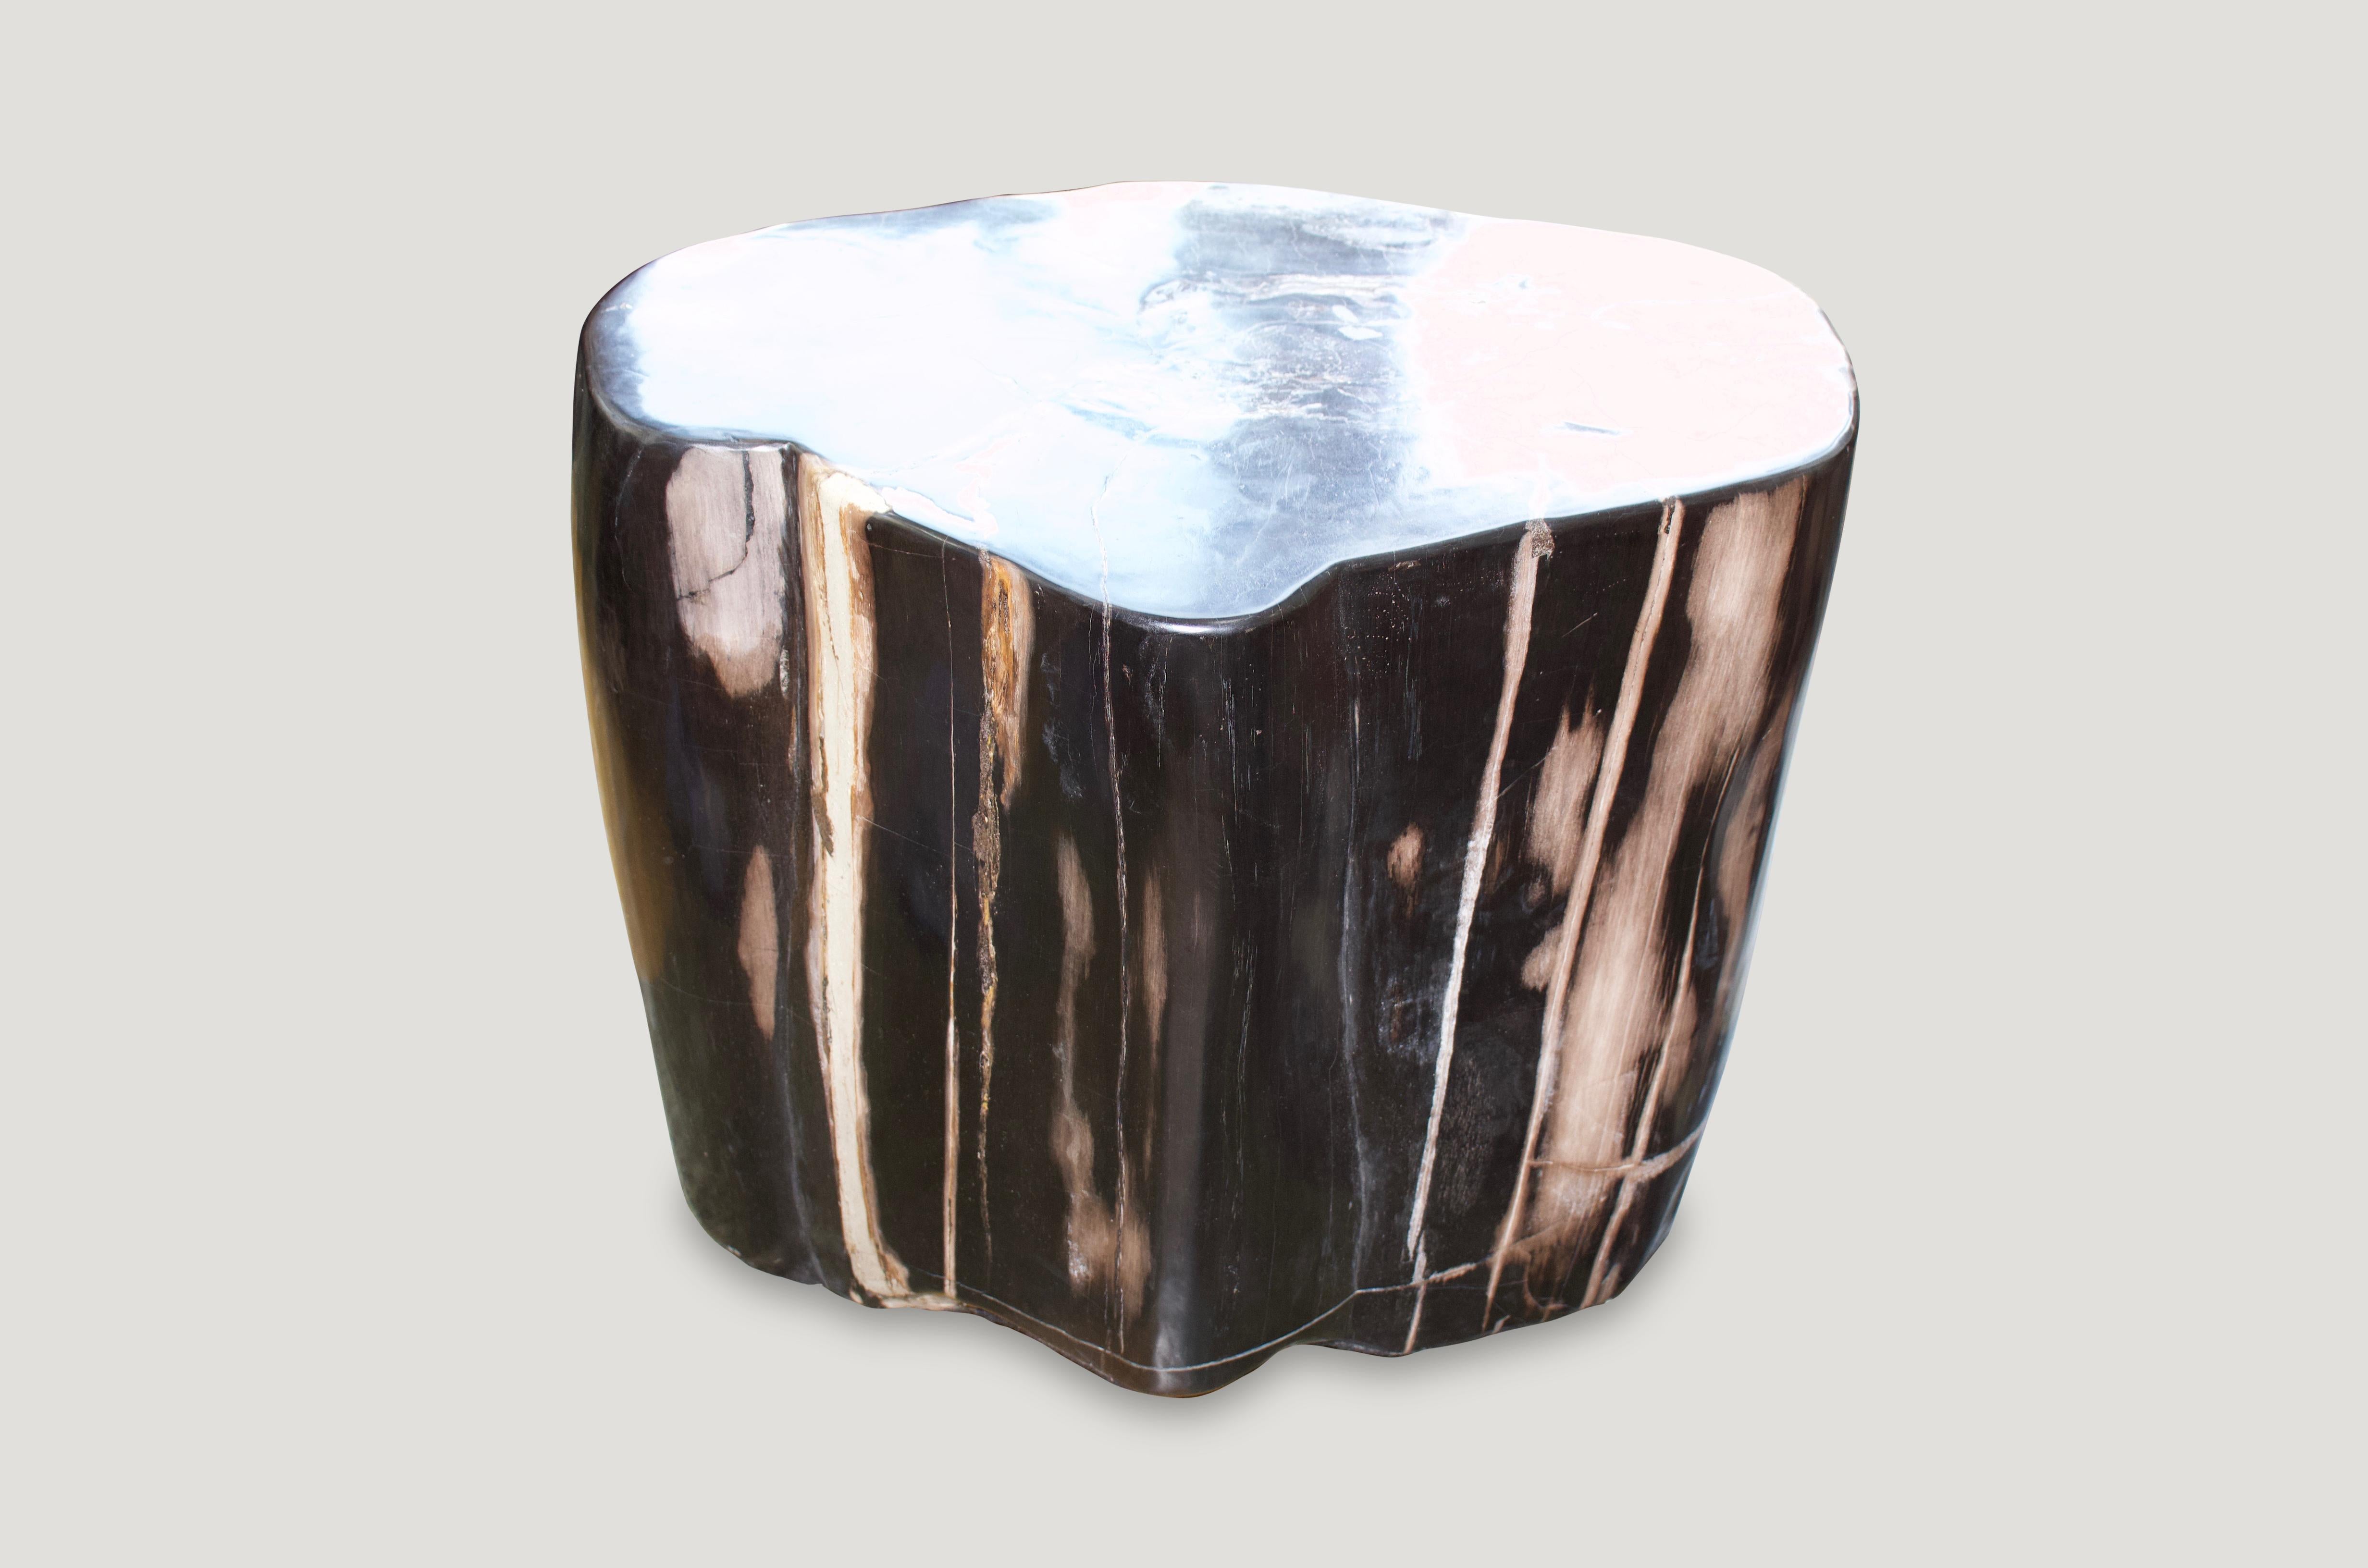 Fabulous color tones on this super smooth petrified wood side table. We have a pair available, cut from the same petrified log. The price reflects one.

We source the highest quality petrified wood available. Over 40 million years old. Each piece